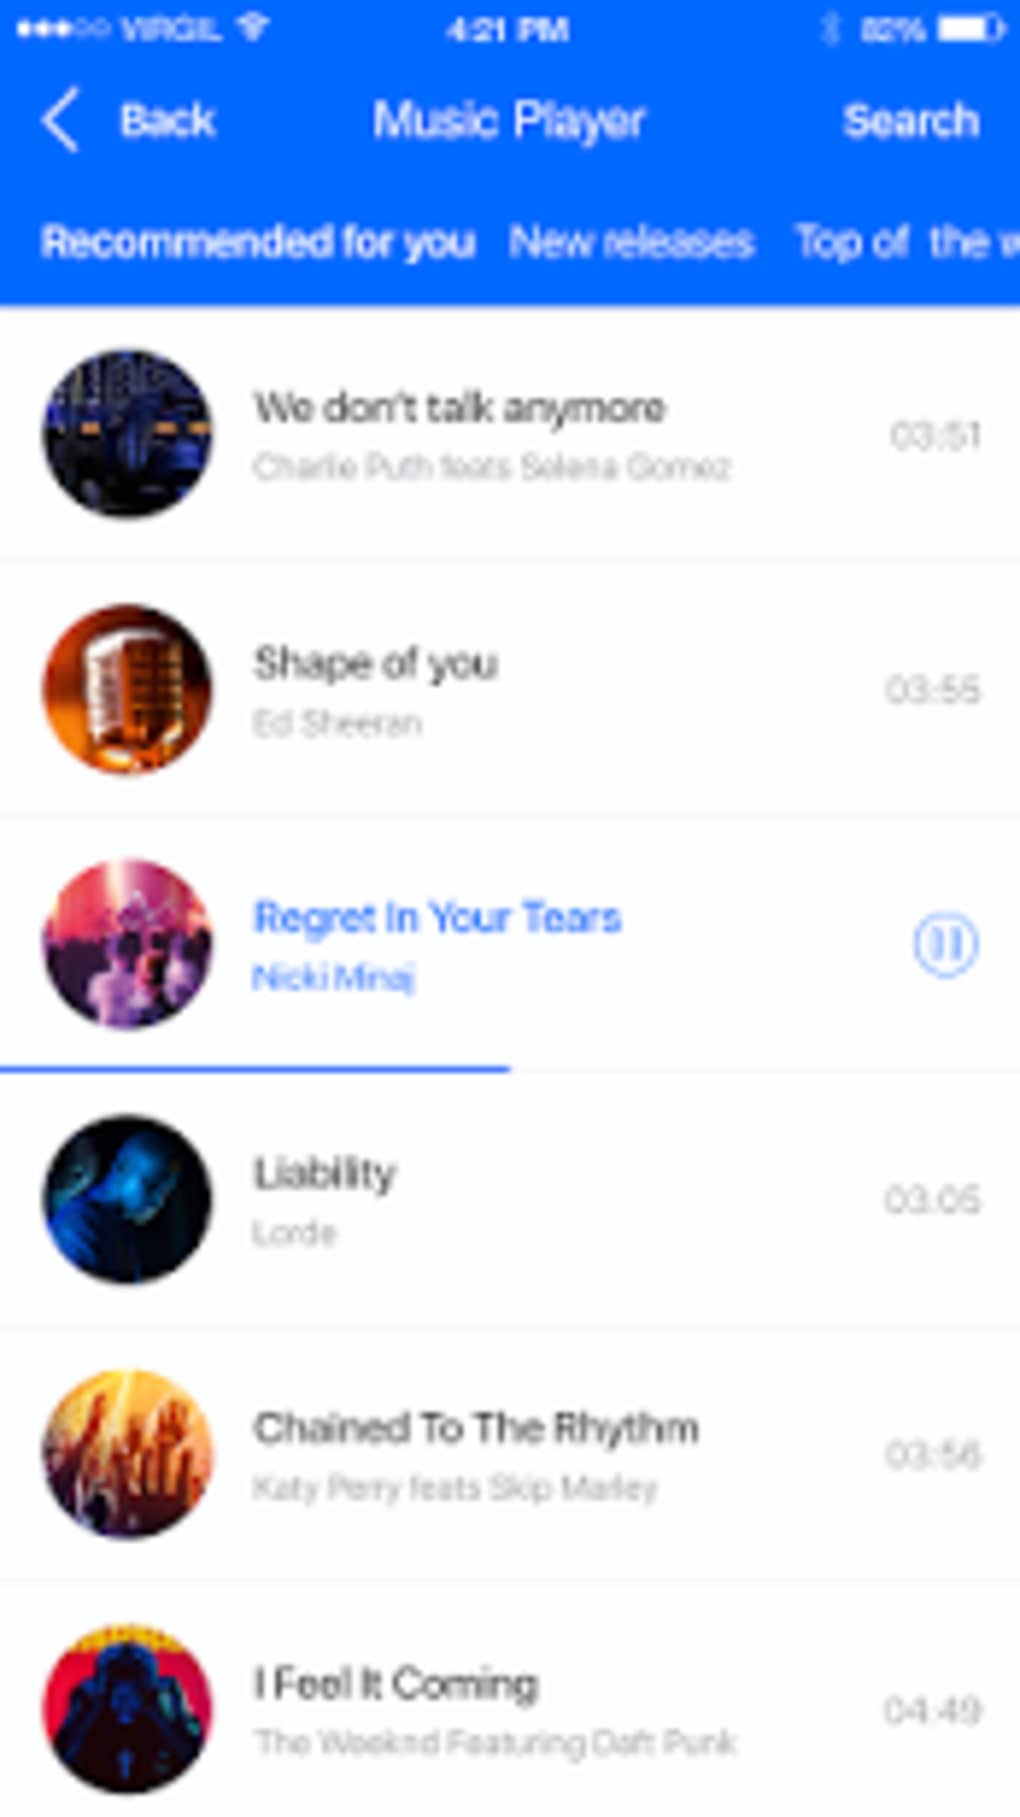 Free Music Downloader Apk لنظام Android تنزيل